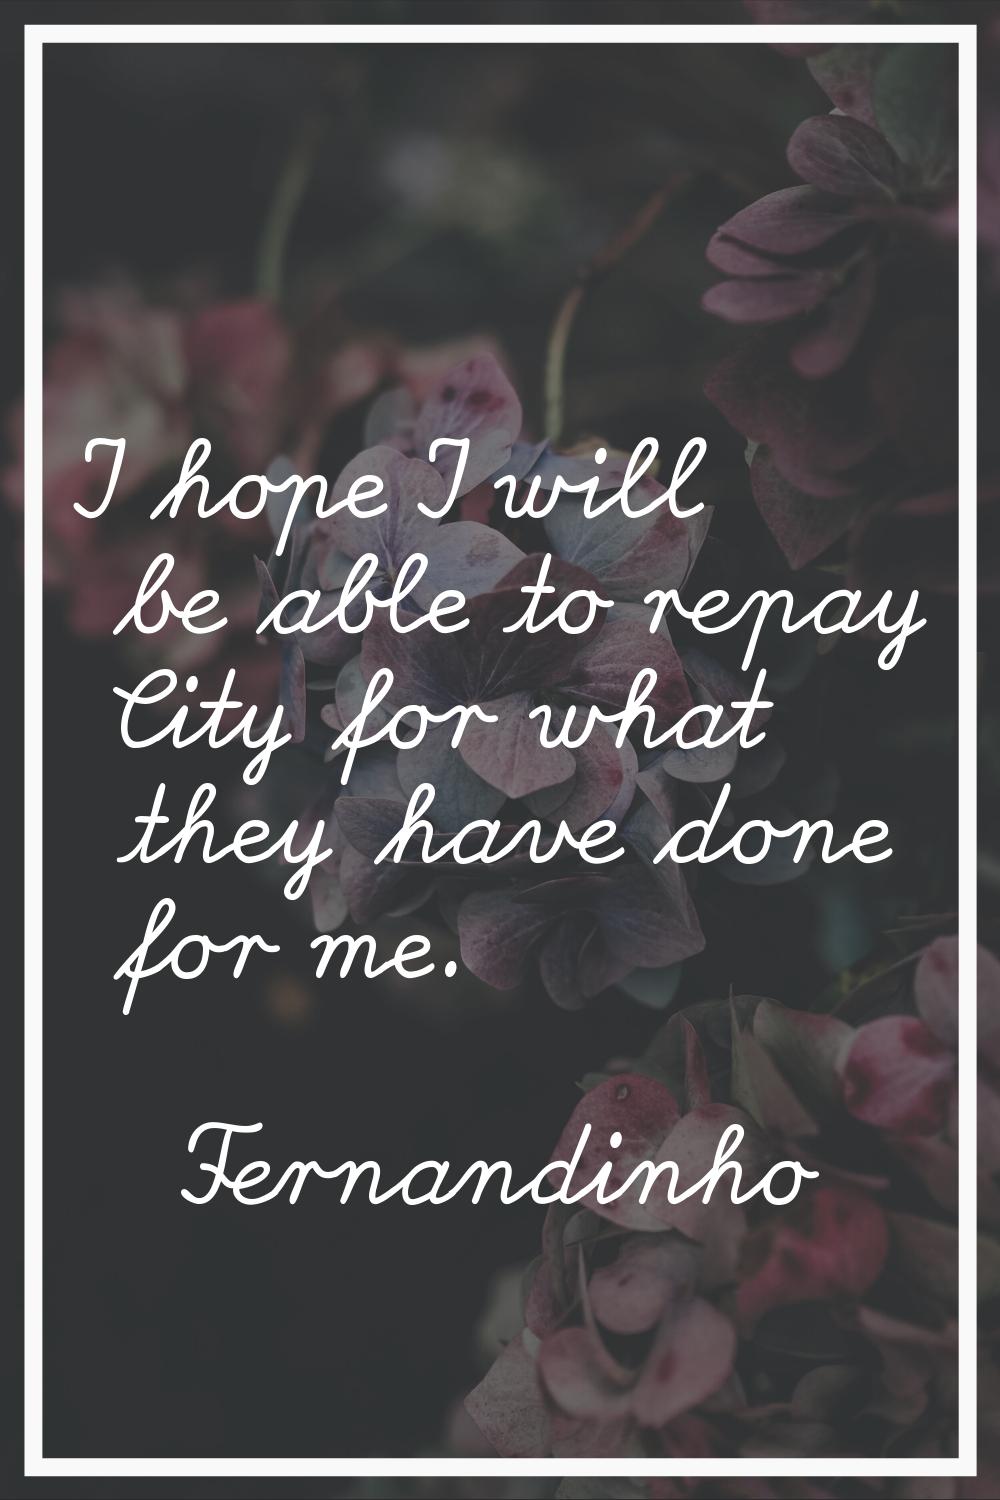 I hope I will be able to repay City for what they have done for me.